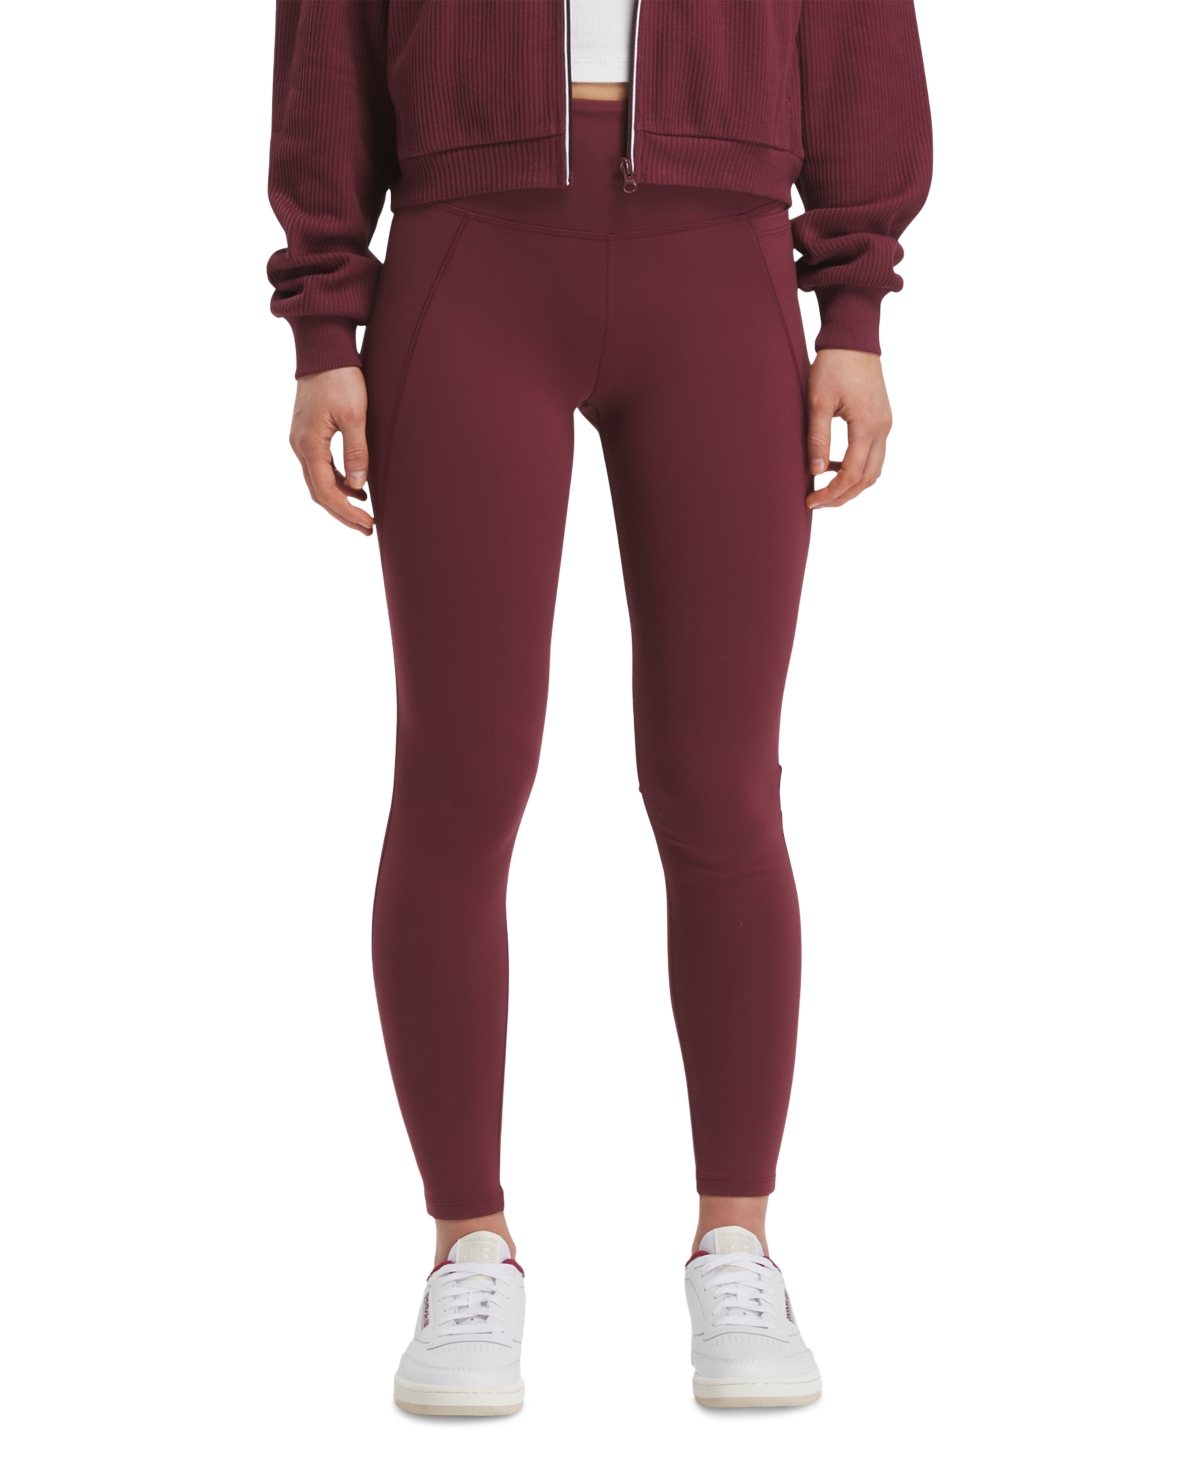 Women's Lux High-Waisted Pull-On Leggings, A Macy's Exclusive - Classic Maroon